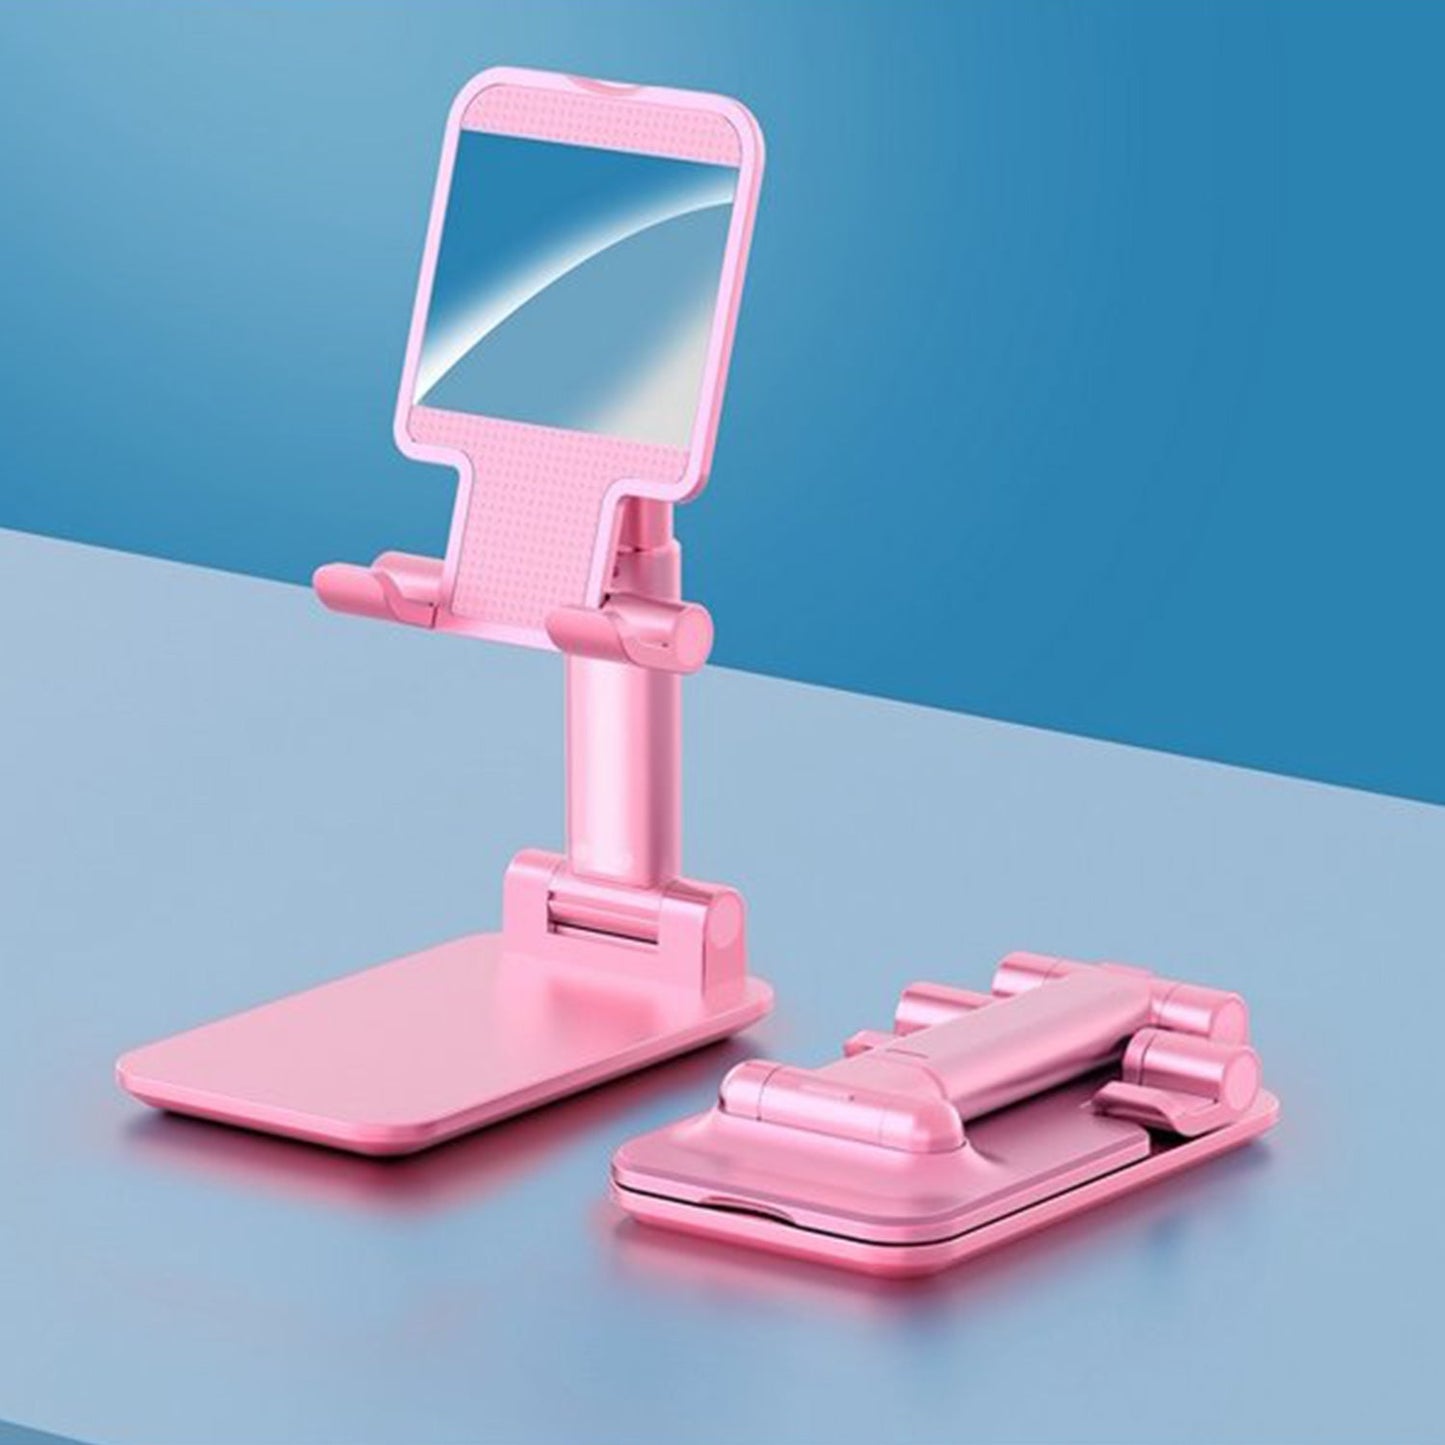 6636 Desktop Cell Phone Stand Phone Holder with mirror Full 3-Way Adjustable Phone Stand for Desk Height + Angles Perfect As Desk Organizers and Accessories. DeoDap